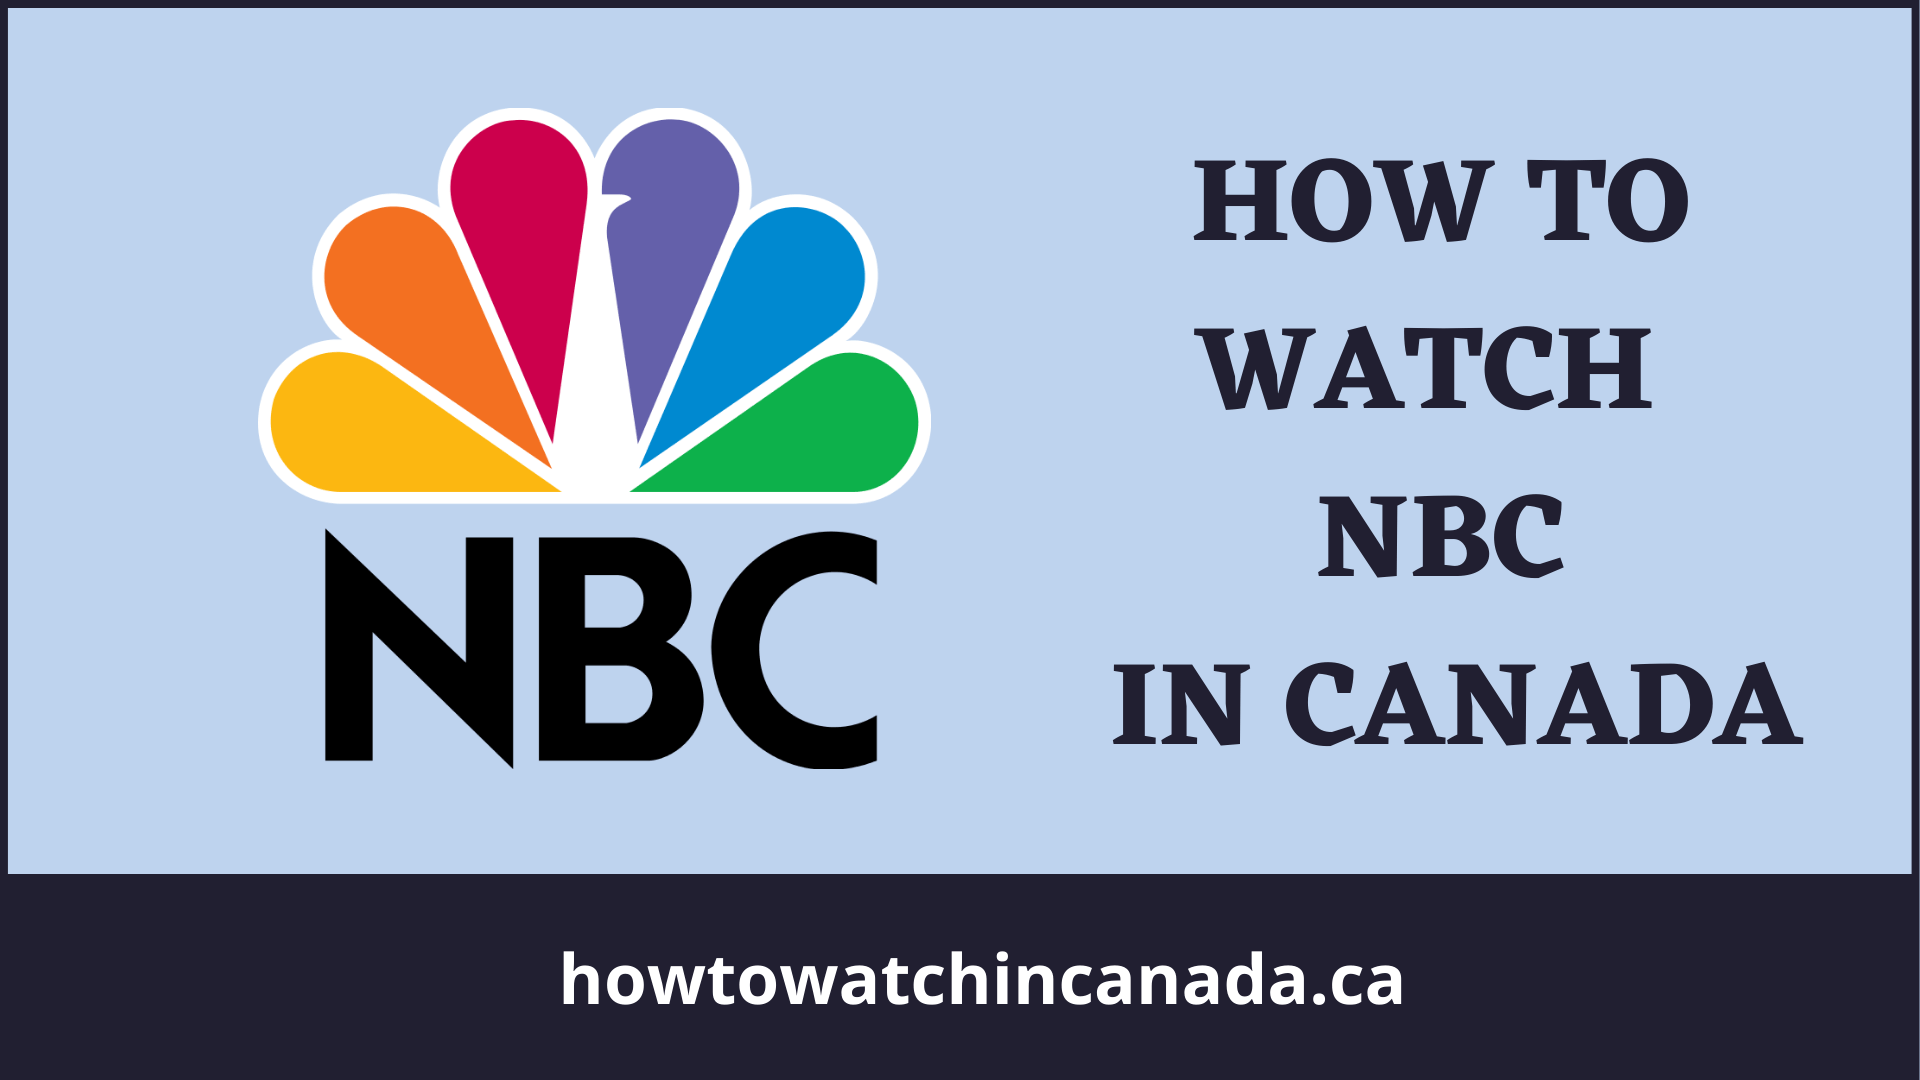 nbc-logo-how-to-watch-in-canada